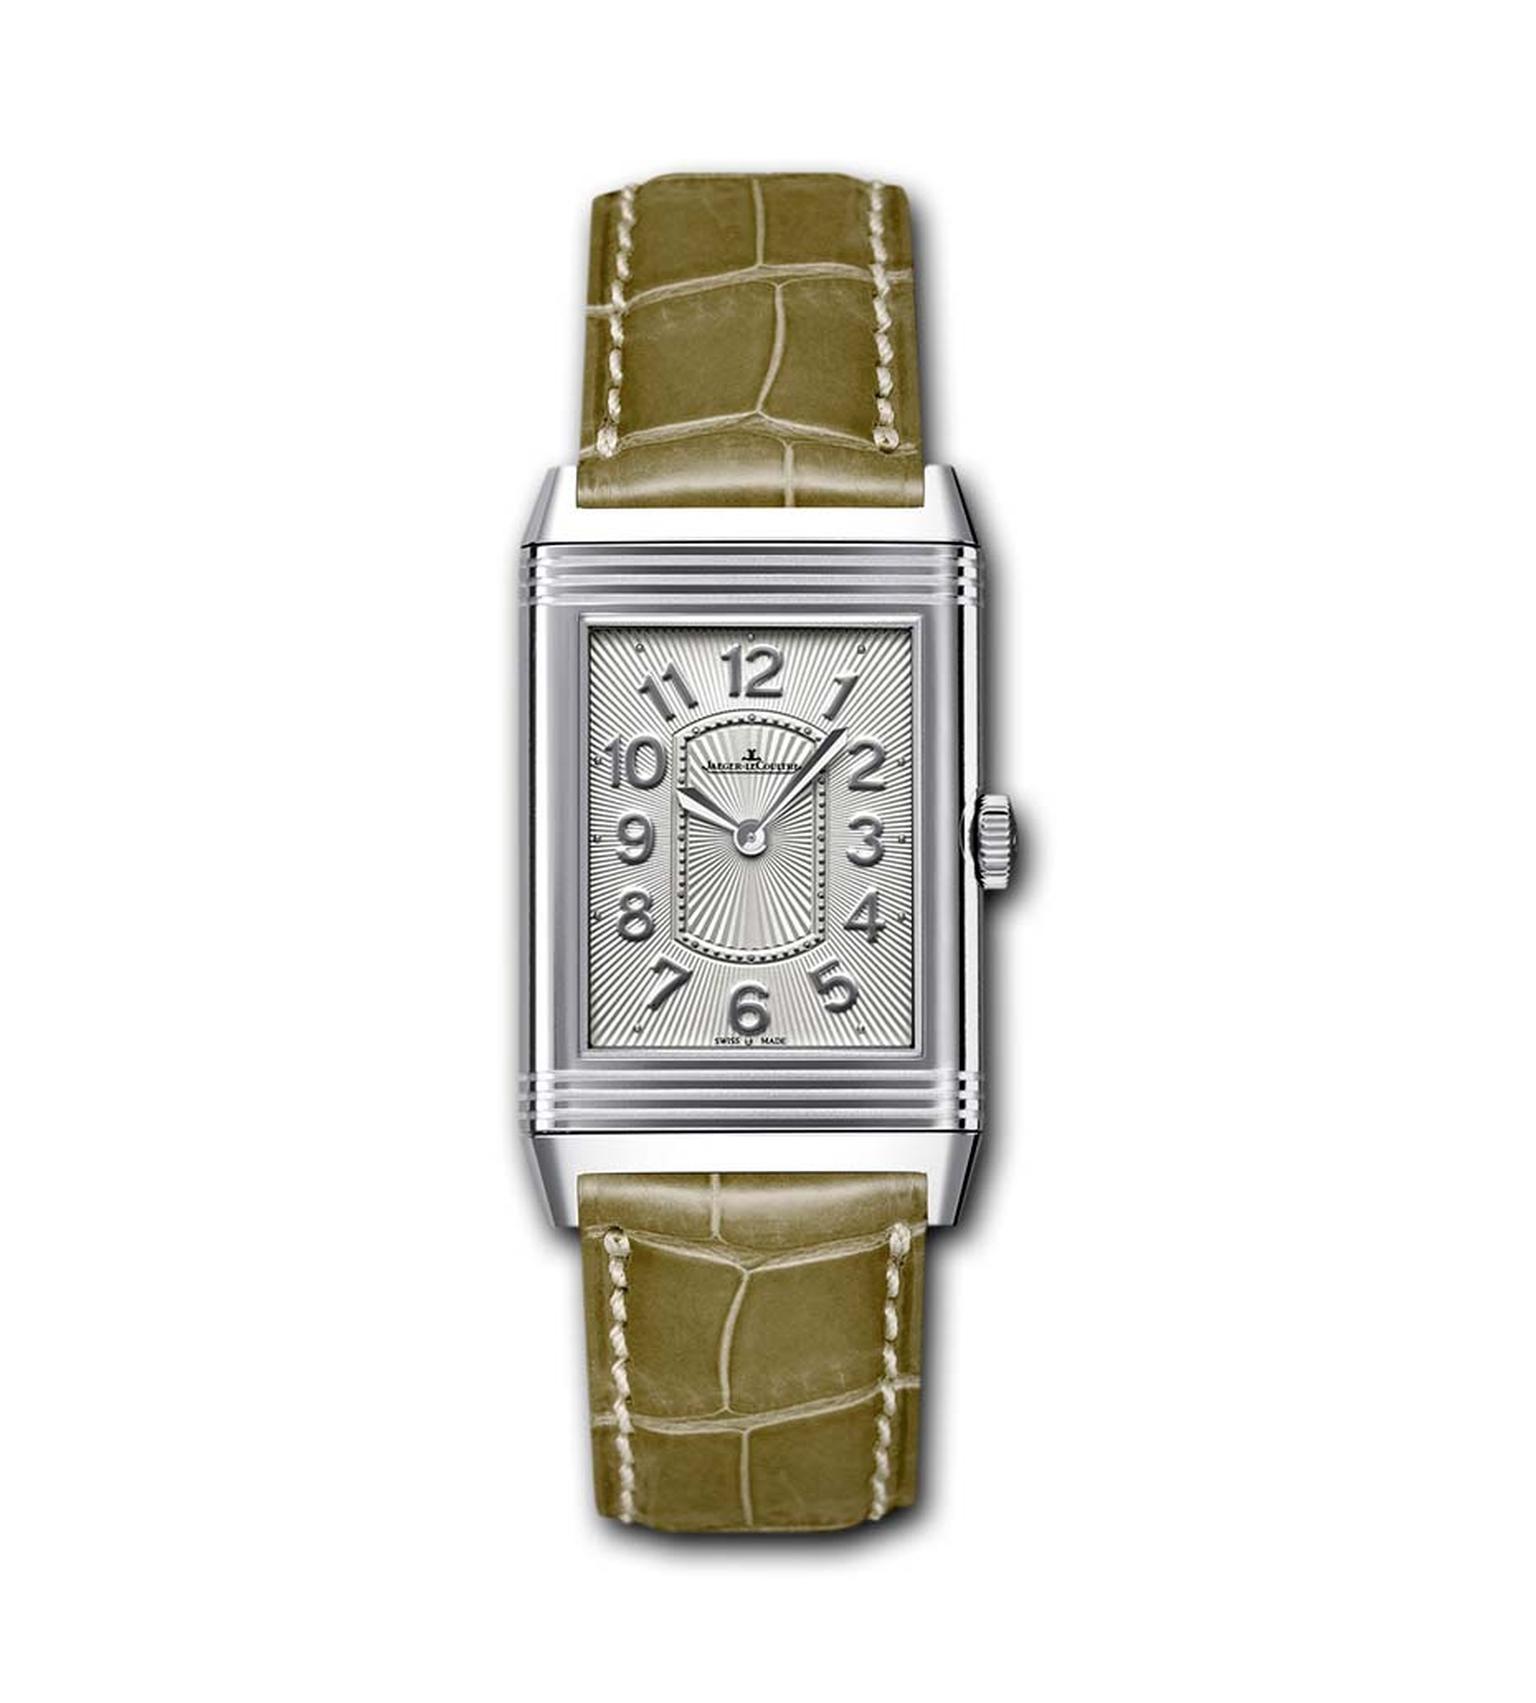 The curved stainless steel case of the Jaeger-LeCoultre Grande Reverso Lady Ultra Thin watch is a mere 7.2mm thick and features a silvered guilloché and sunray brushed dial that reflects the light in all directions (£3,350).